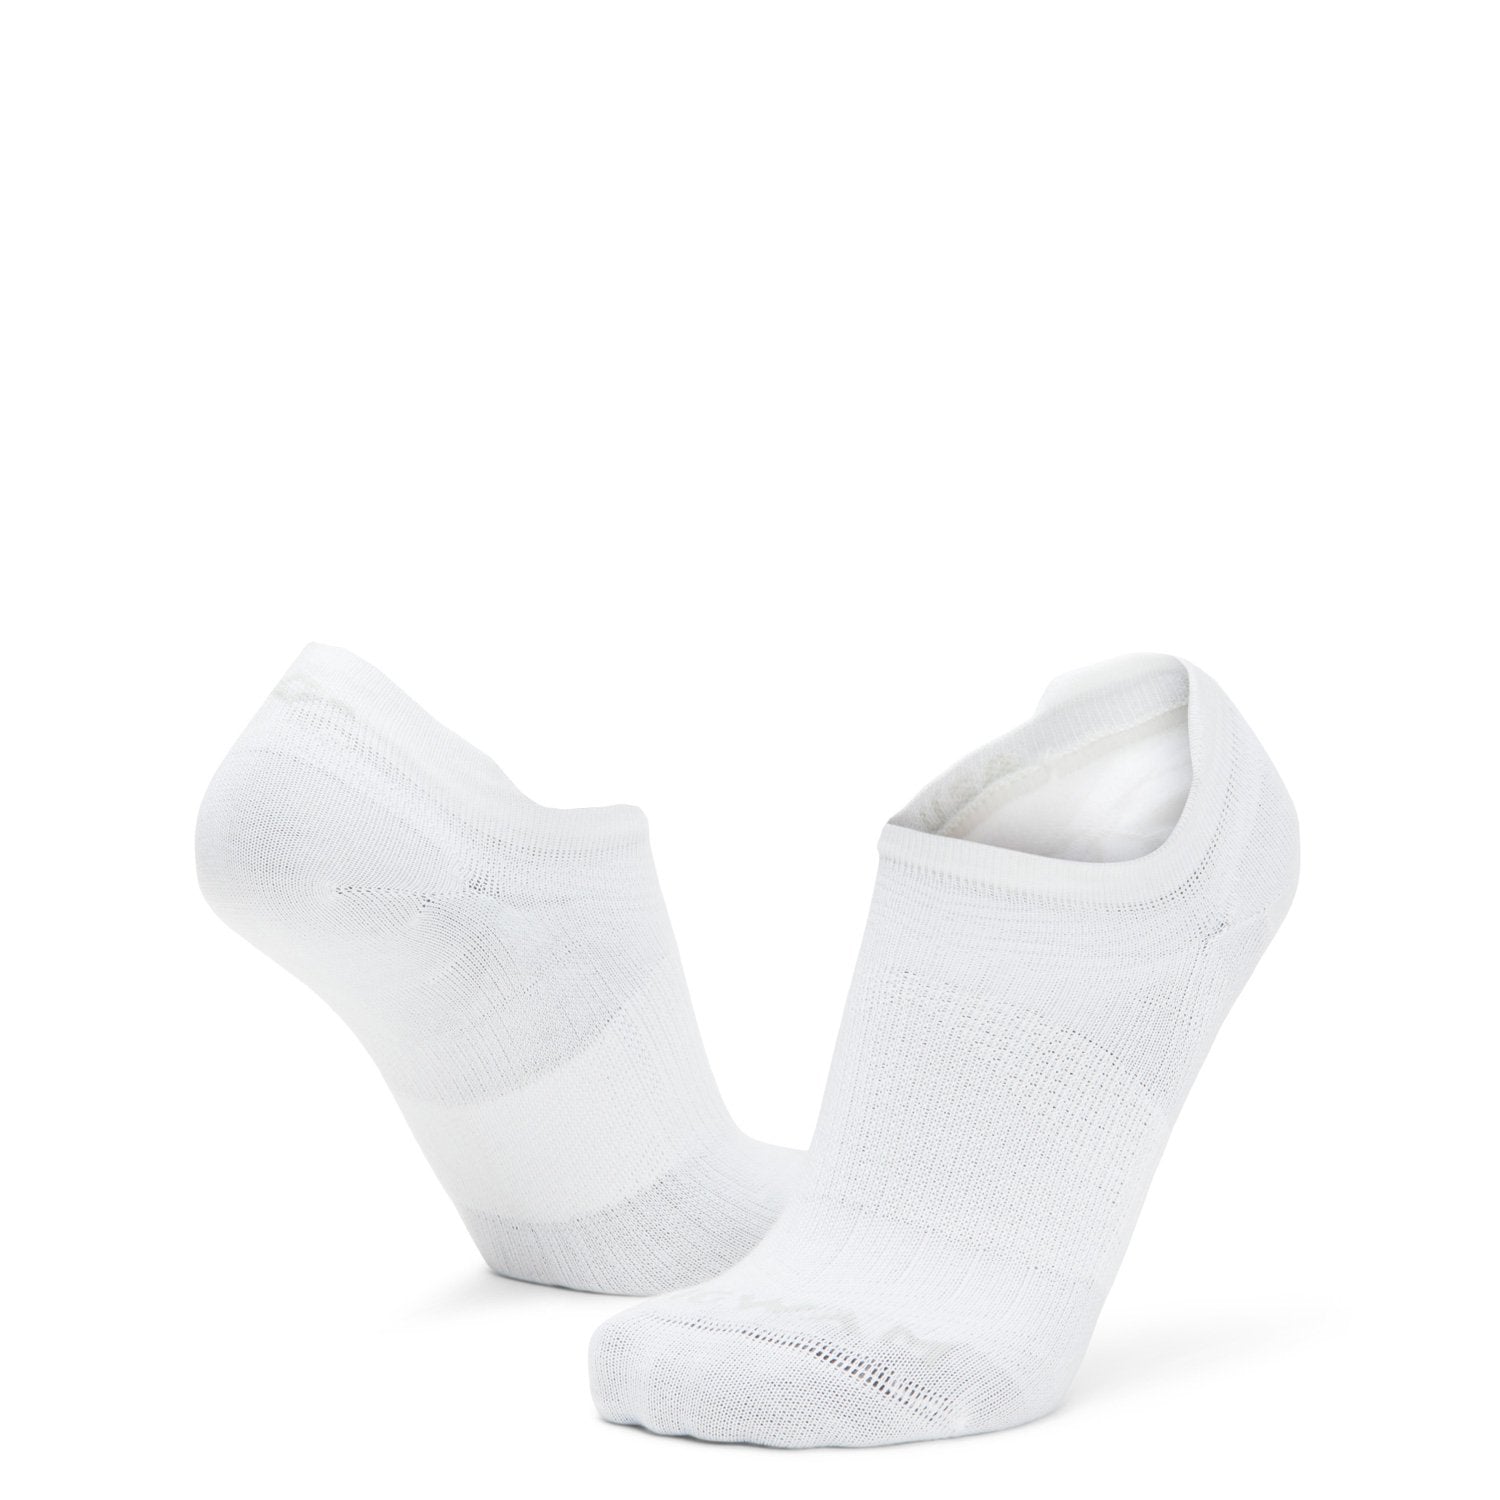 Catalyst Ultra-lightweight Low Cut Sock - White full product perspective - made in The USA Wigwam Socks